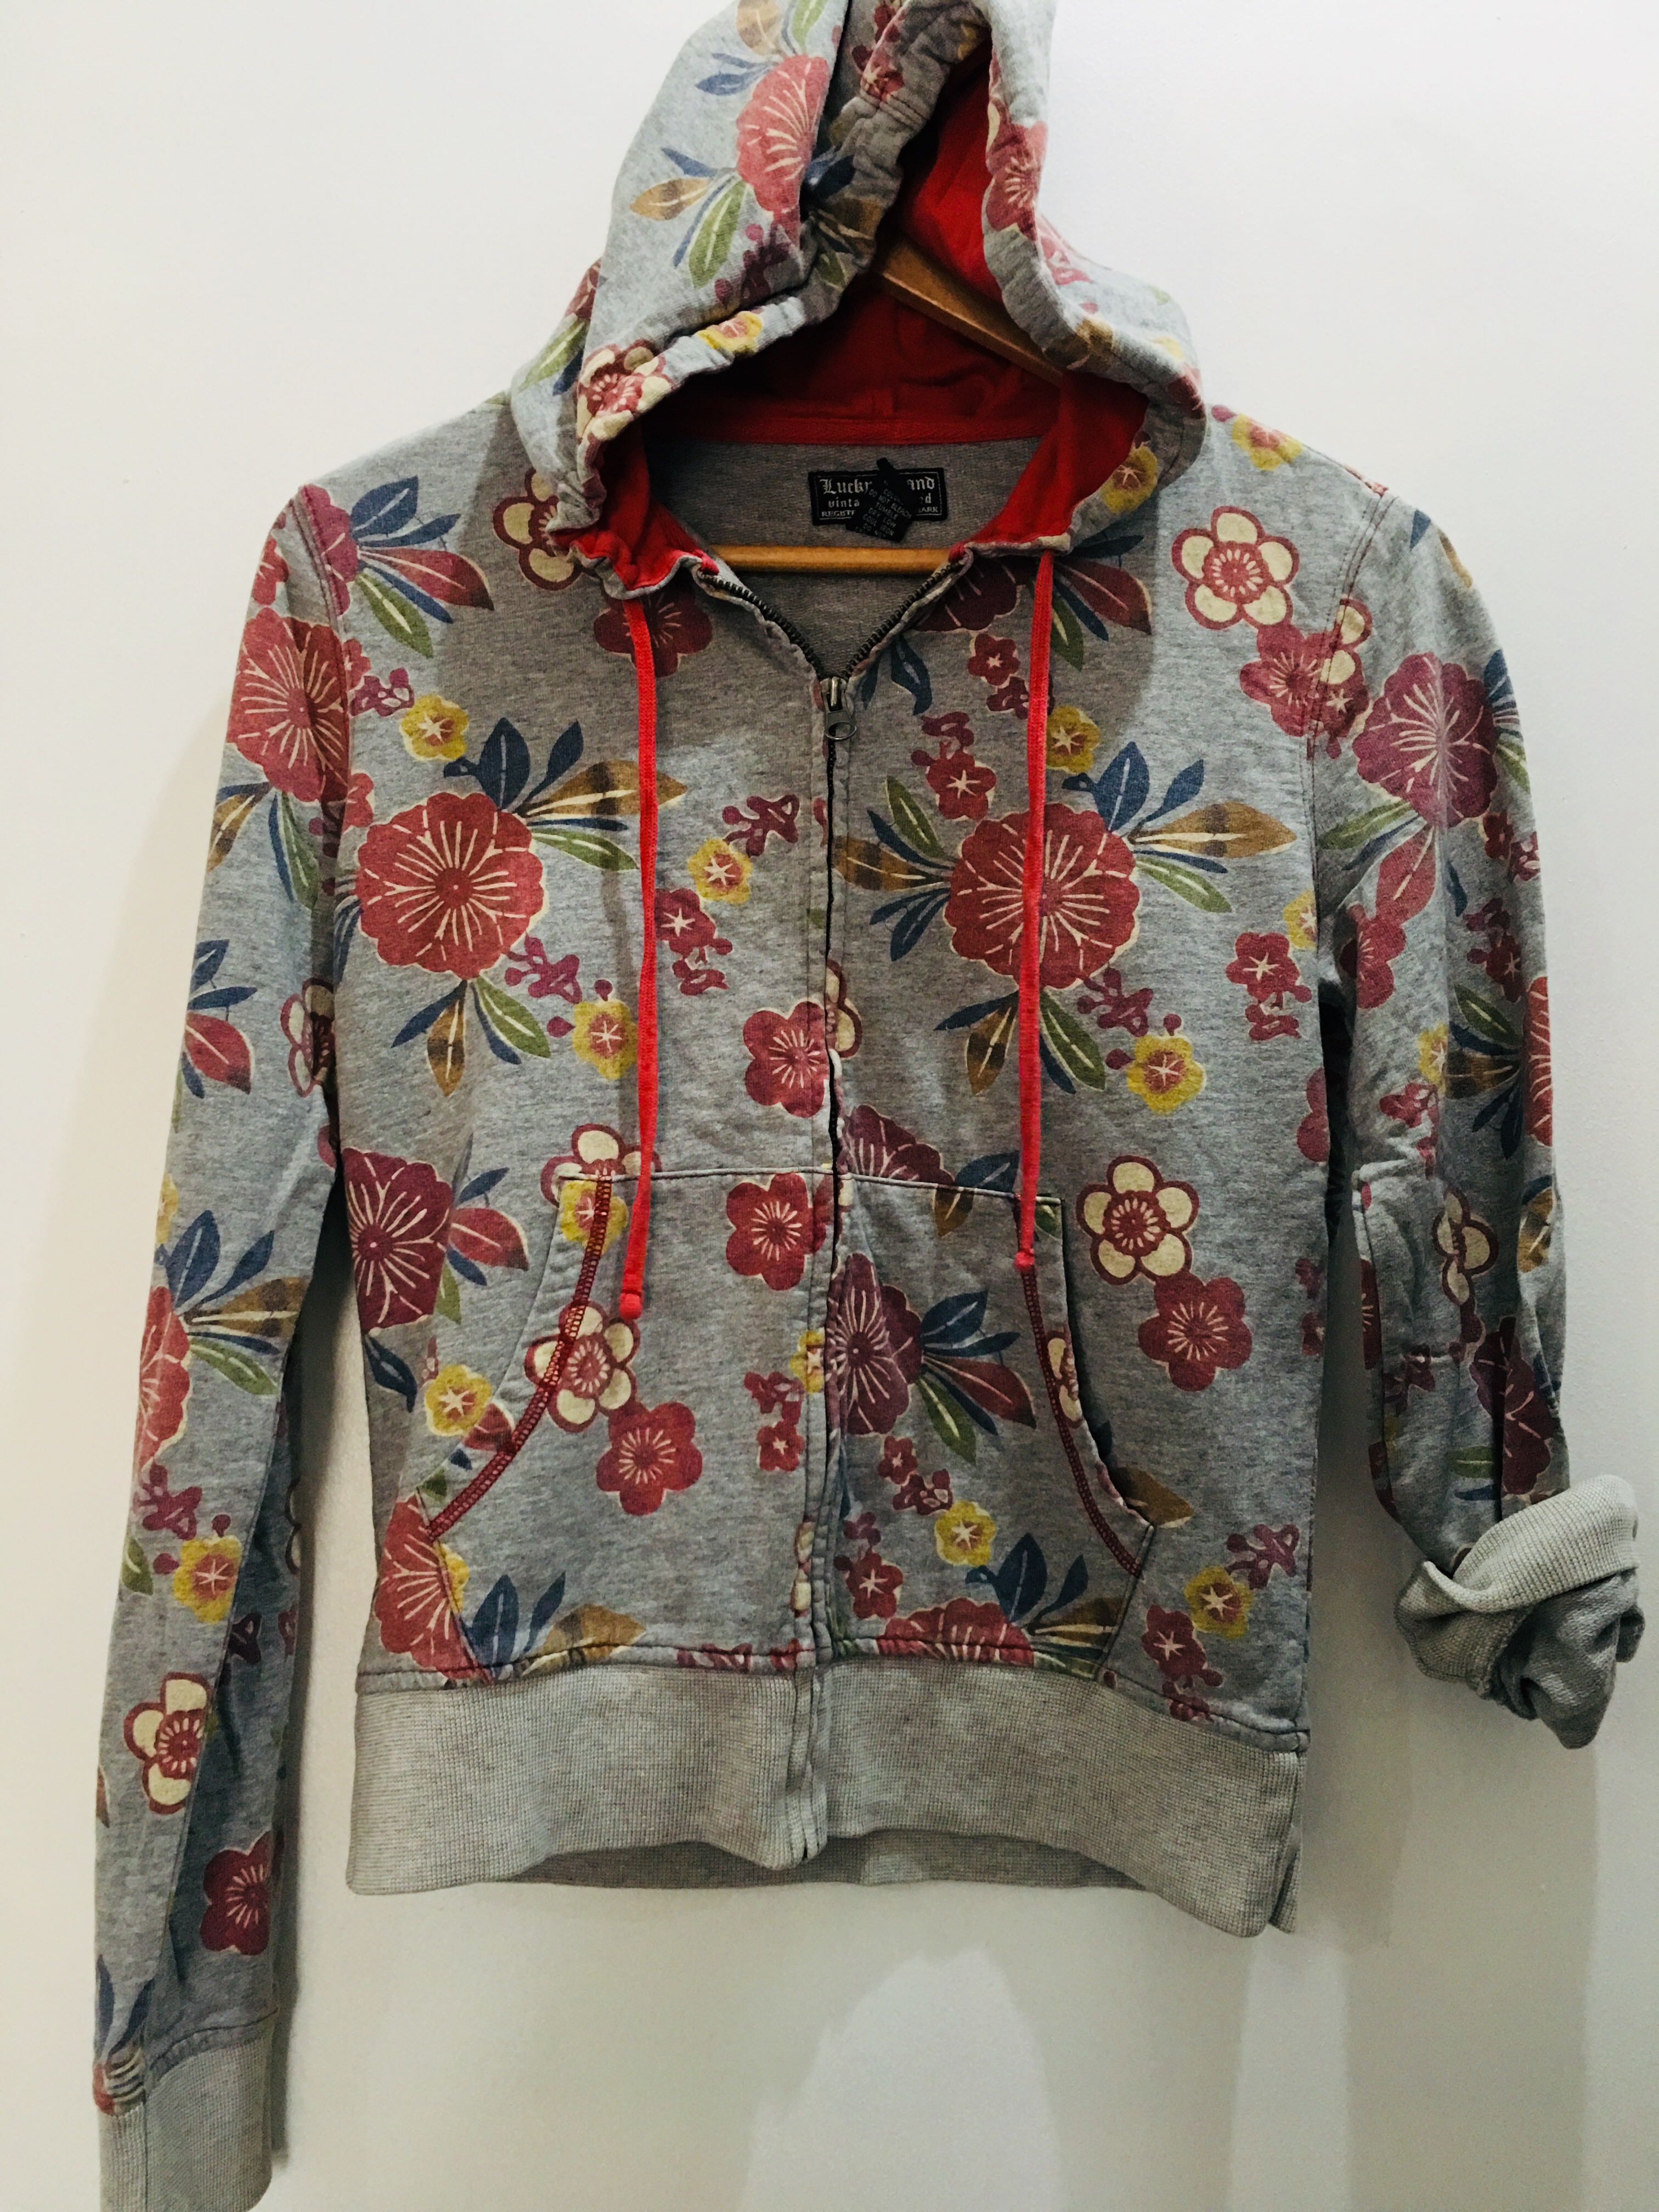 https://media.karousell.com/media/photos/products/2018/11/12/lucky_brand_floral_hoodie_jacket_1541975409_e54ee151.jpg